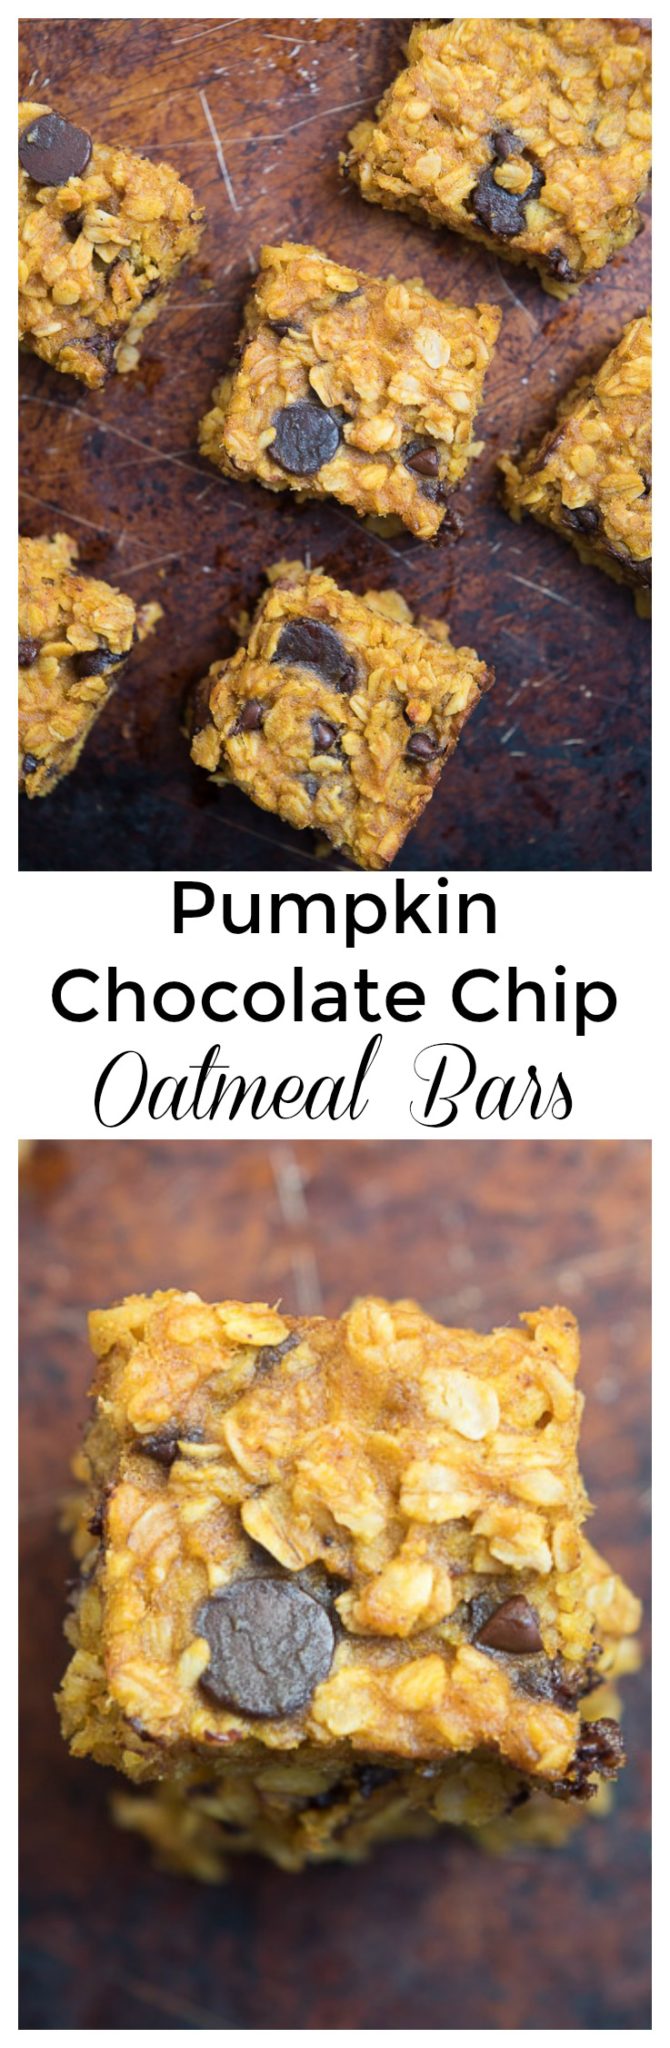 Pumpkin Chocolate Chip Oatmeal Bars- these simple, one mixing bowl bars are gluten free and a great whole grain breakfast or snack!